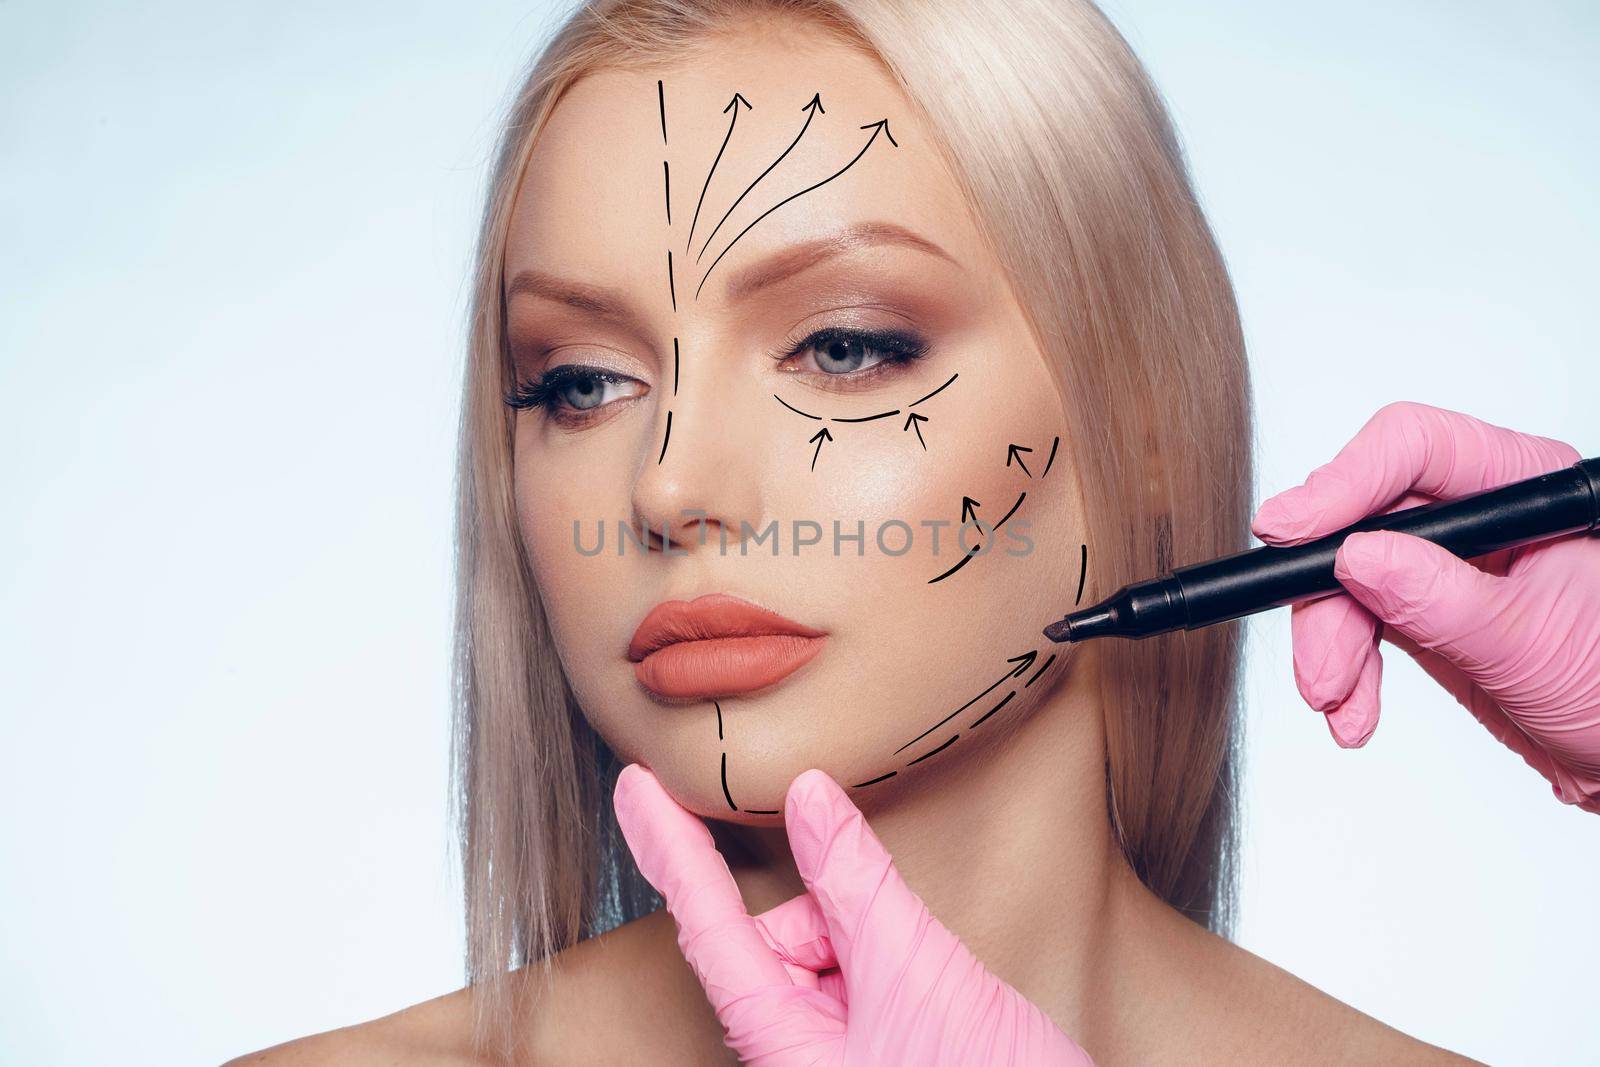 Beautiful blonde woman with markings for plastic surgery on her face, woman portrait